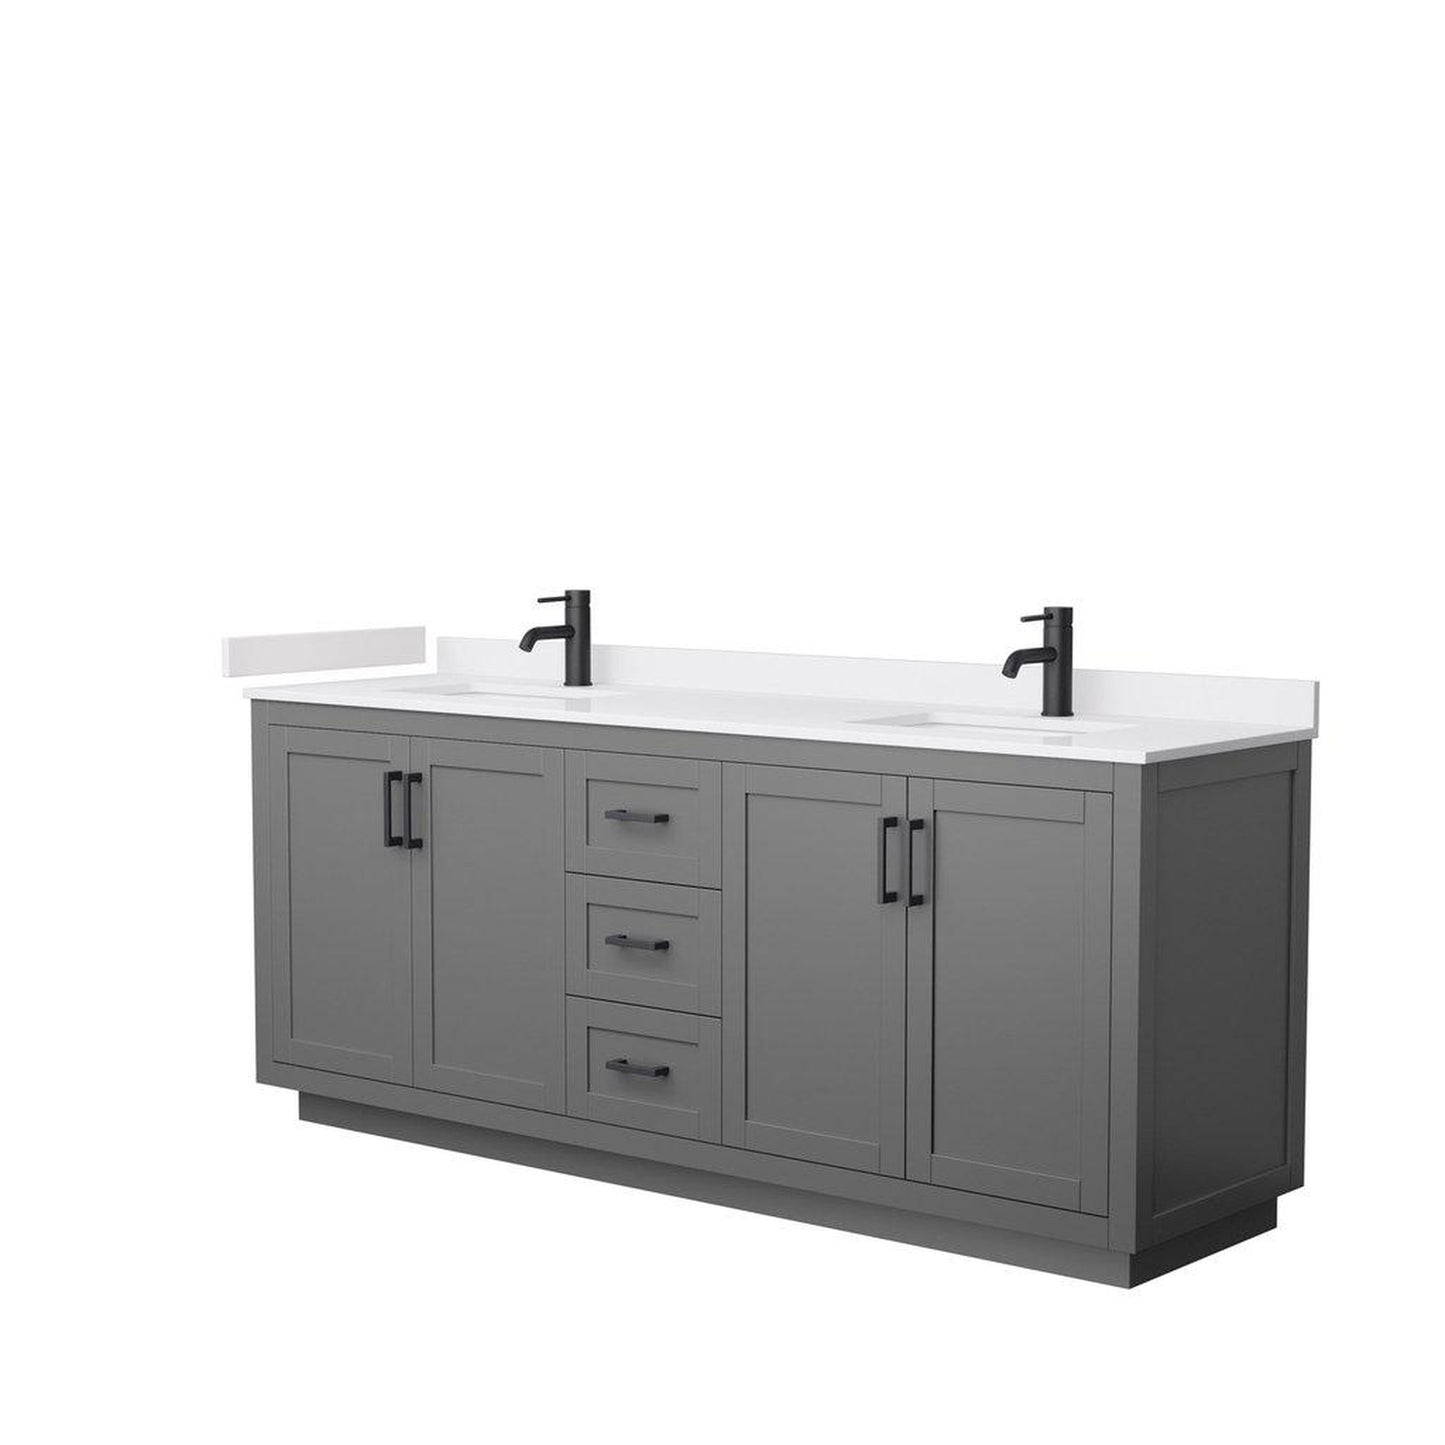 Wyndham Collection Miranda 80" Double Bathroom Dark Gray Vanity Set With White Cultured Marble Countertop, Undermount Square Sink, And Matte Black Trim